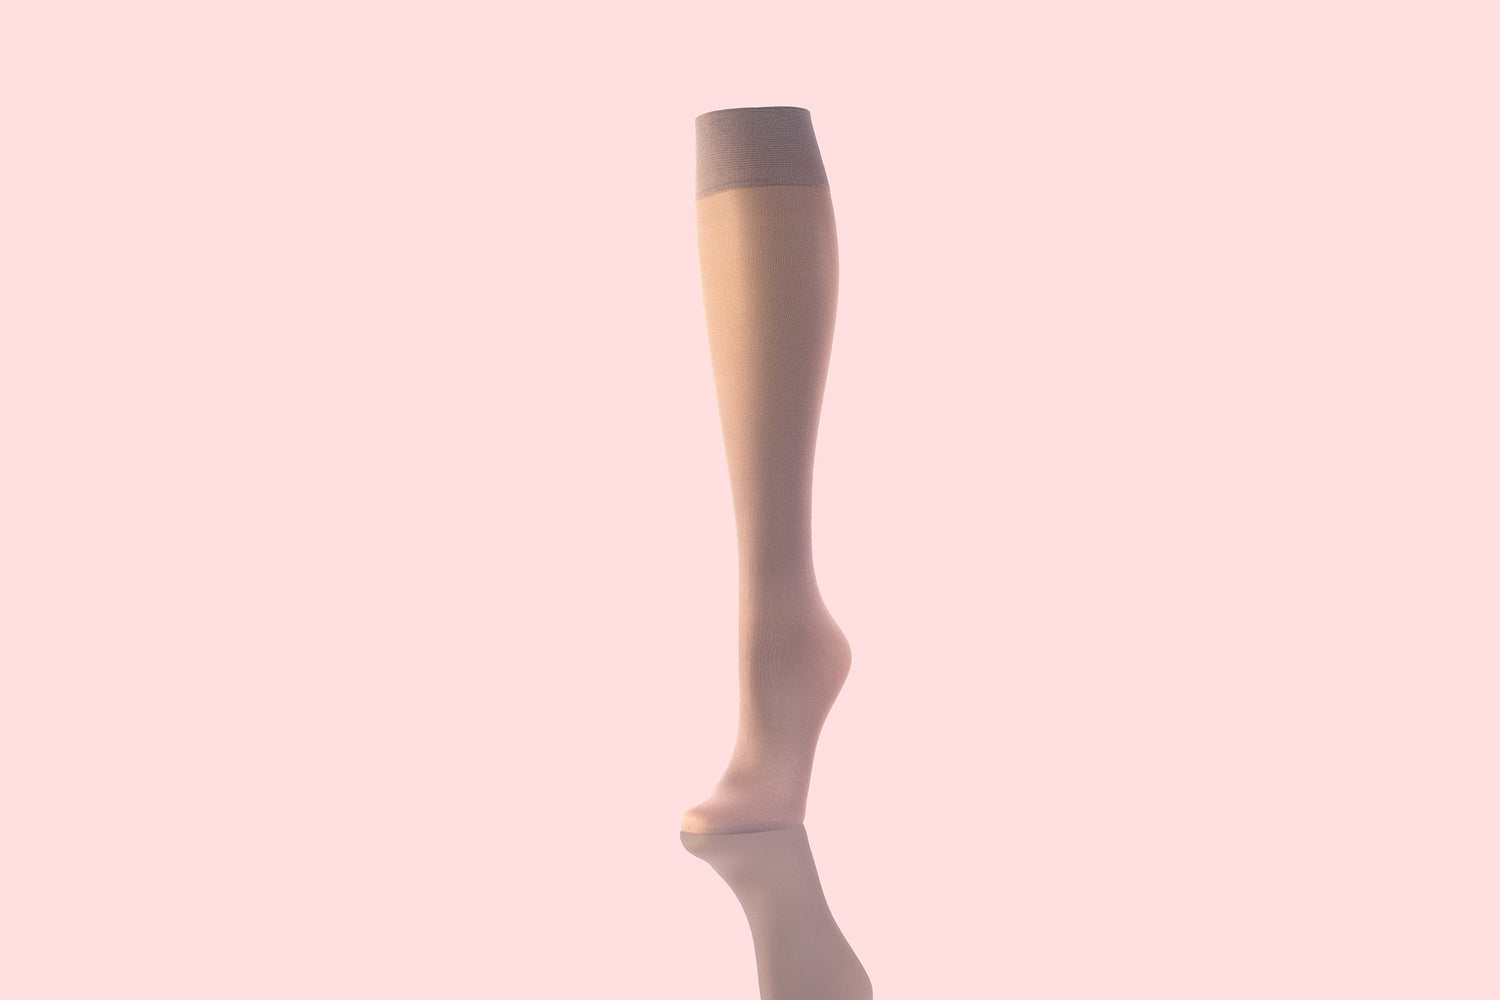 Knee High Compression Socks In Skin Color - Sheer Fabric - Light Pink Background - Featured Category